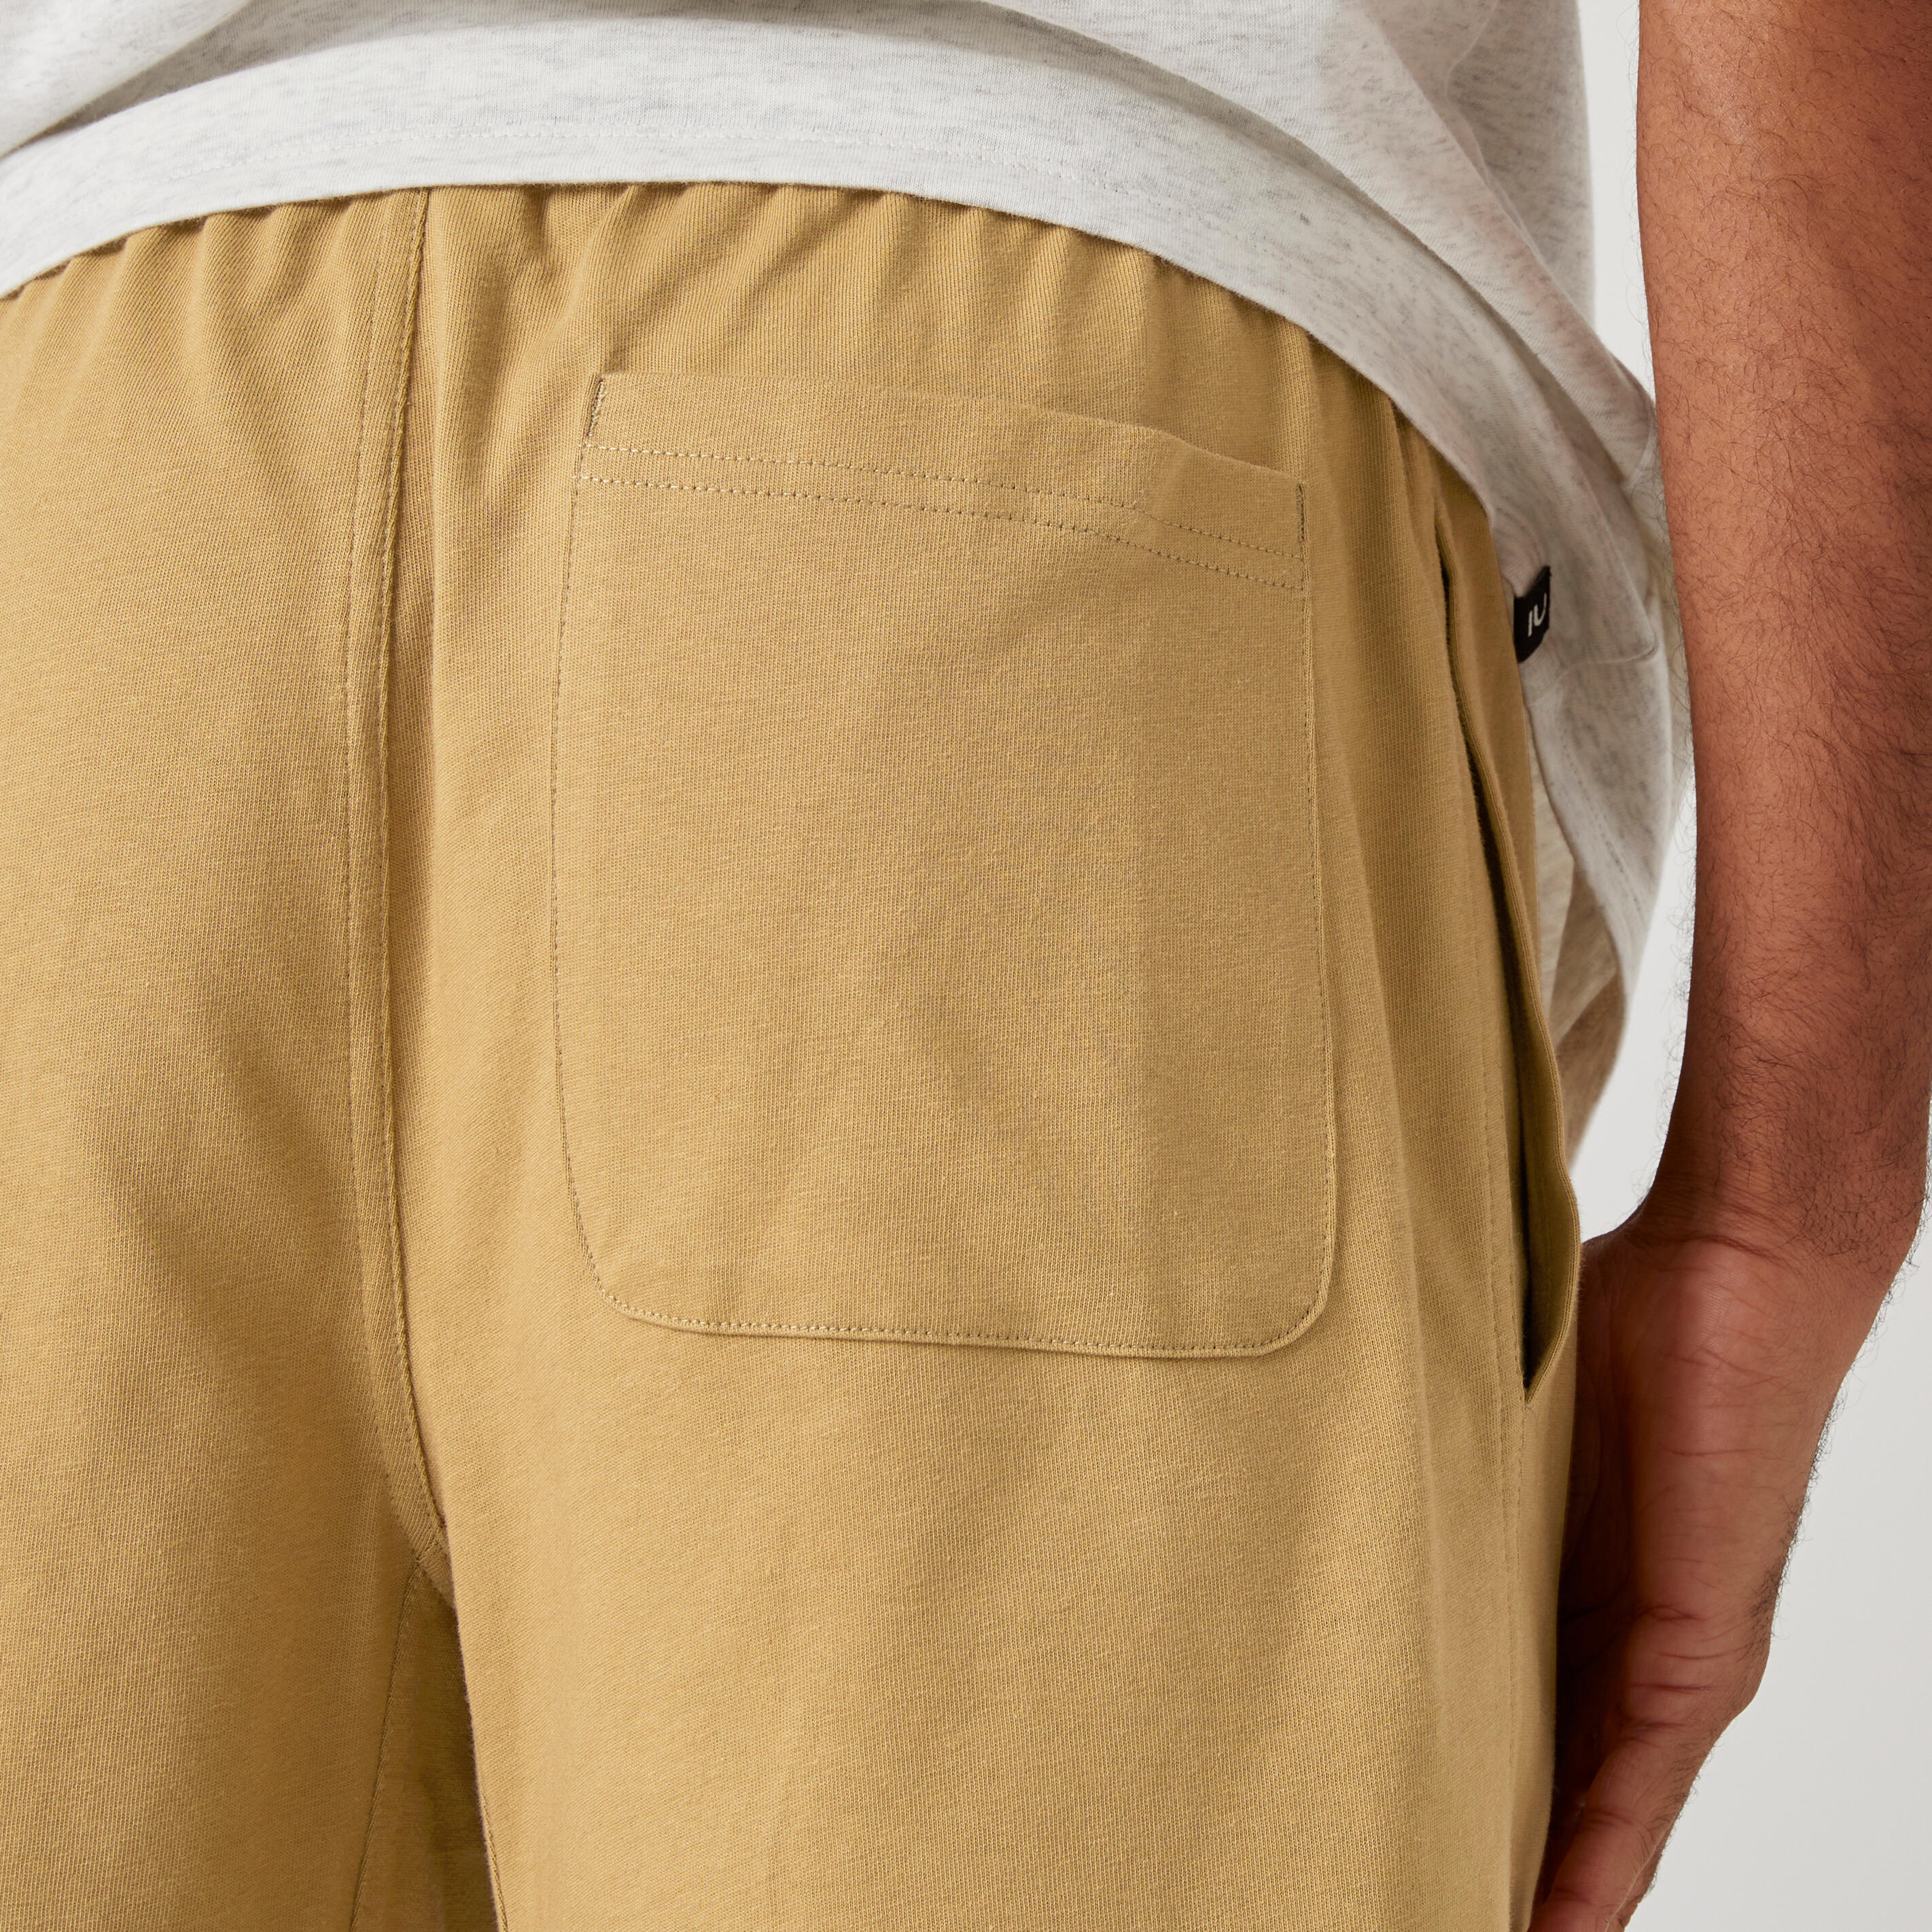 Men's Straight-Cut Cotton Fitness Shorts with Pocket - Beige 7/8